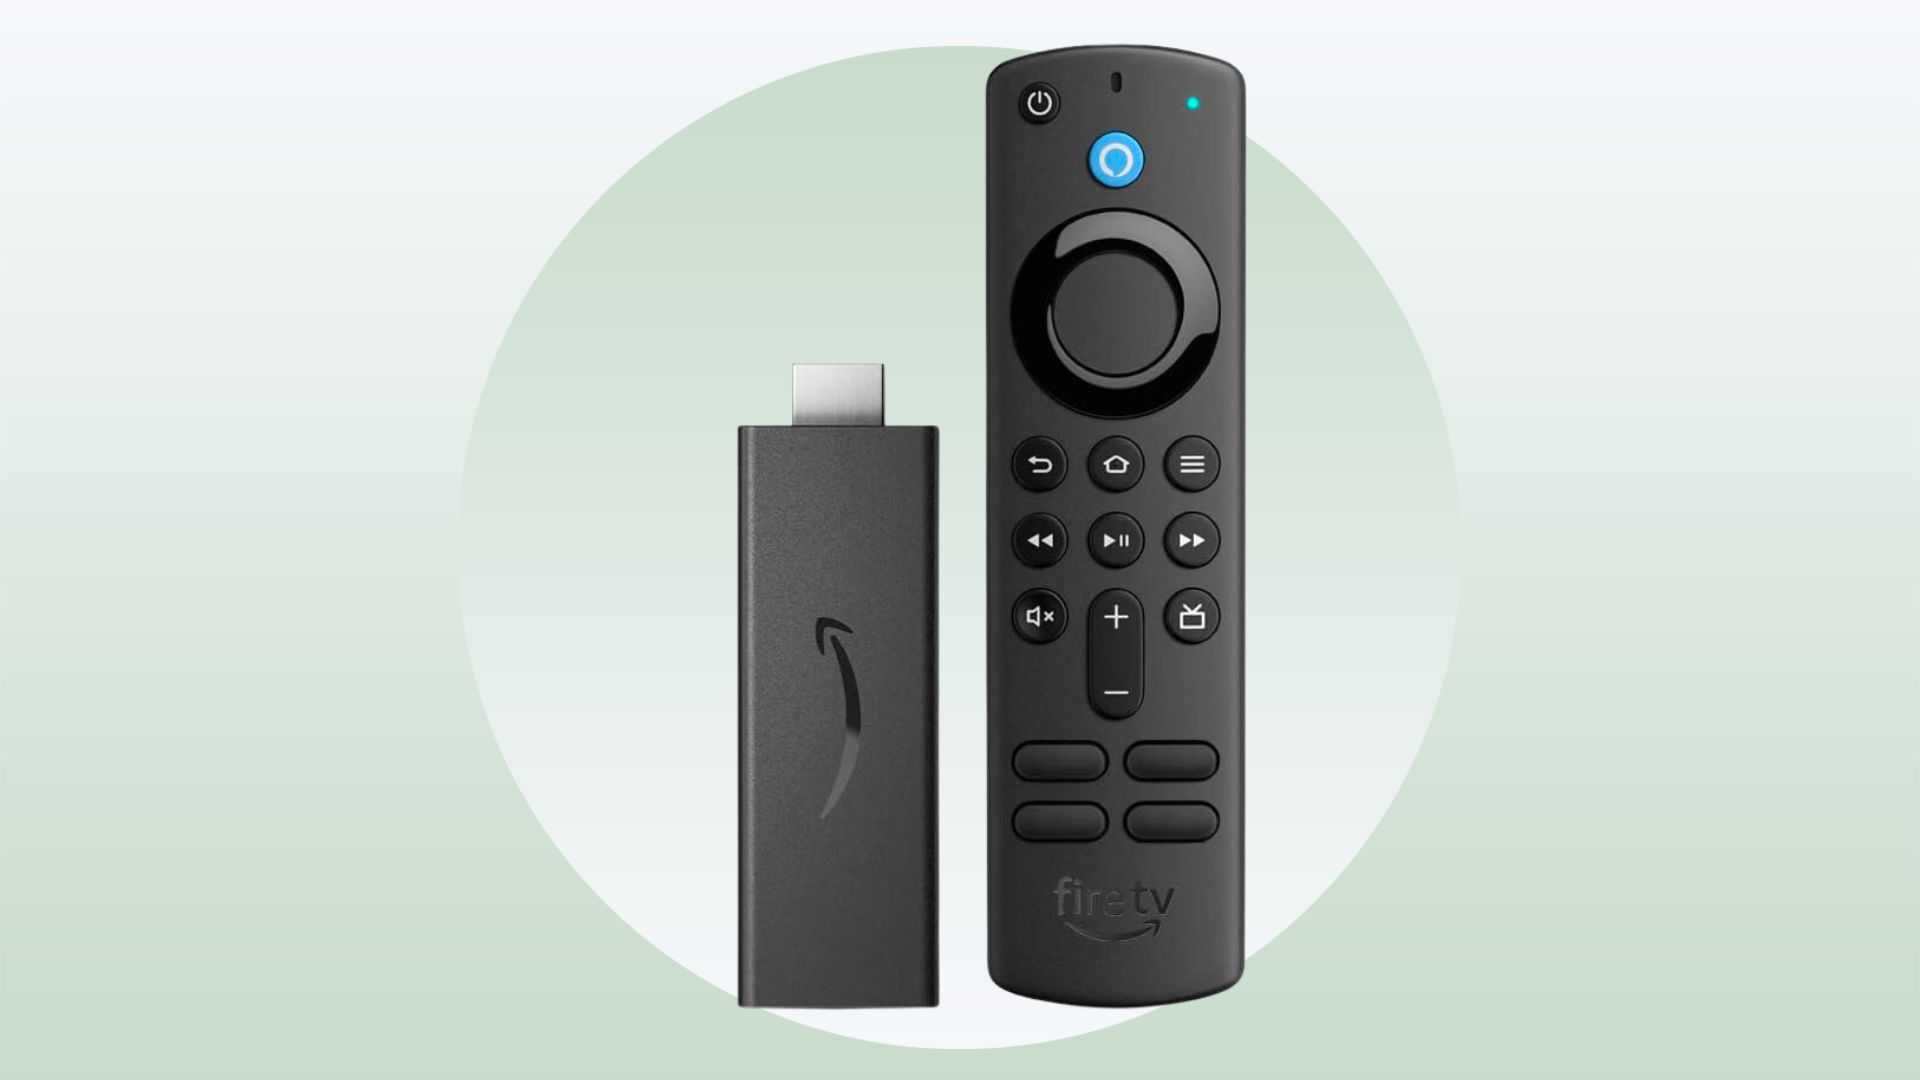 The Amazon Fire TV Stick for $22? Yep, it's 45% off, the lowest price of the year